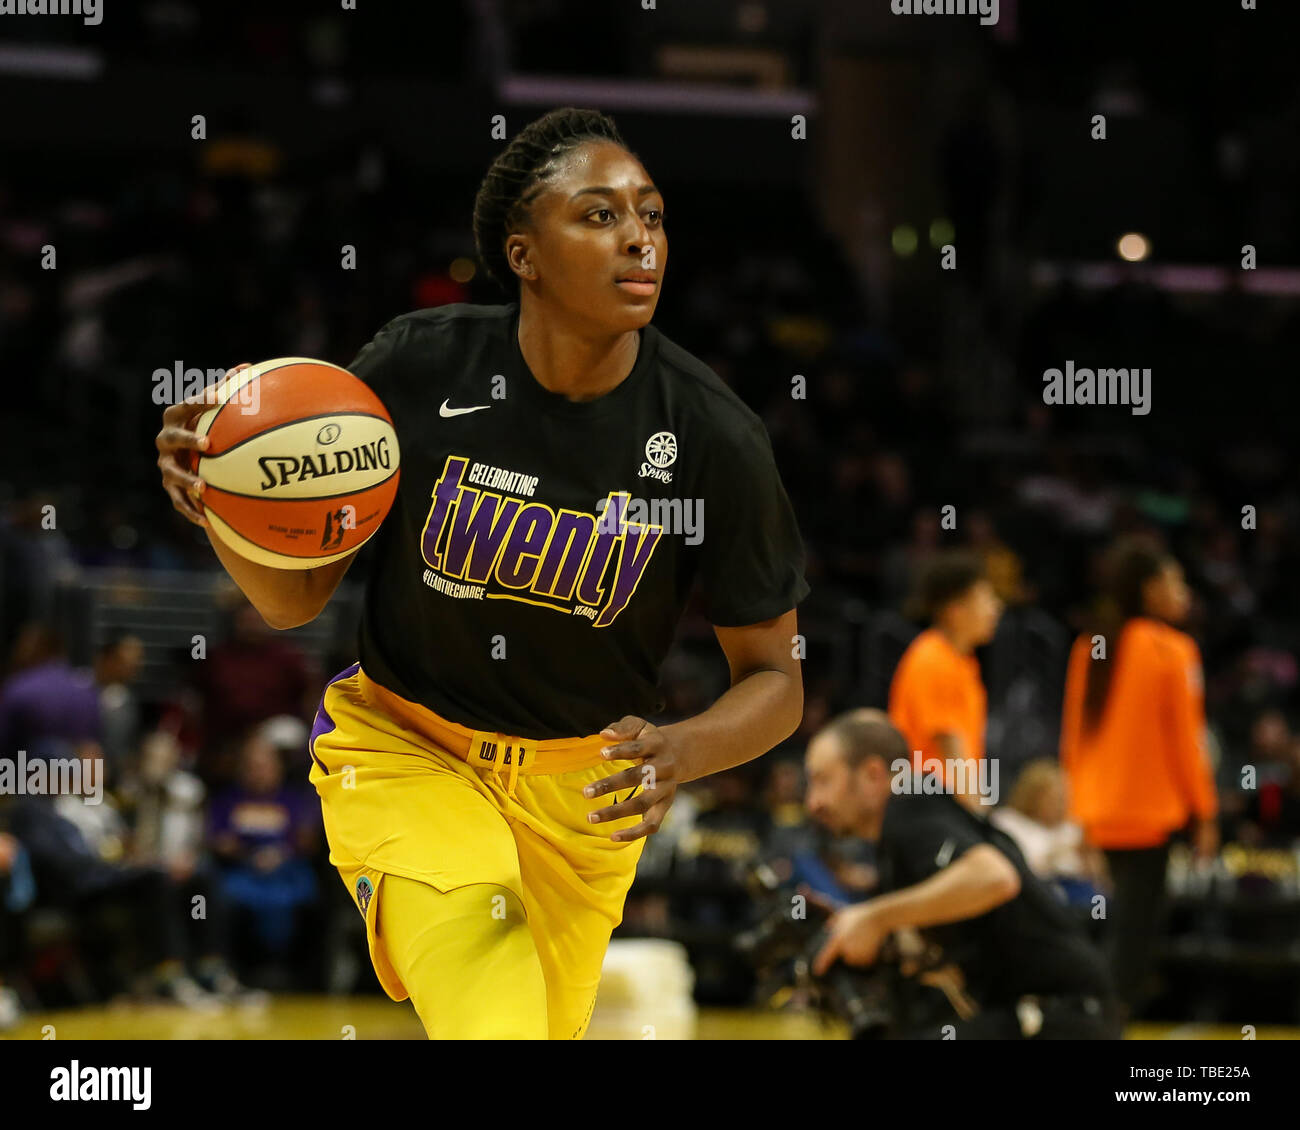 Los Angeles Sparks forward Nneka Ogwumike #30 during the Connecticut Sun vs Los Angeles Sparks game at Staples Center in Los Angeles, Ca on May 31, 2019. (Photo by Jevone Moore) Stock Photo